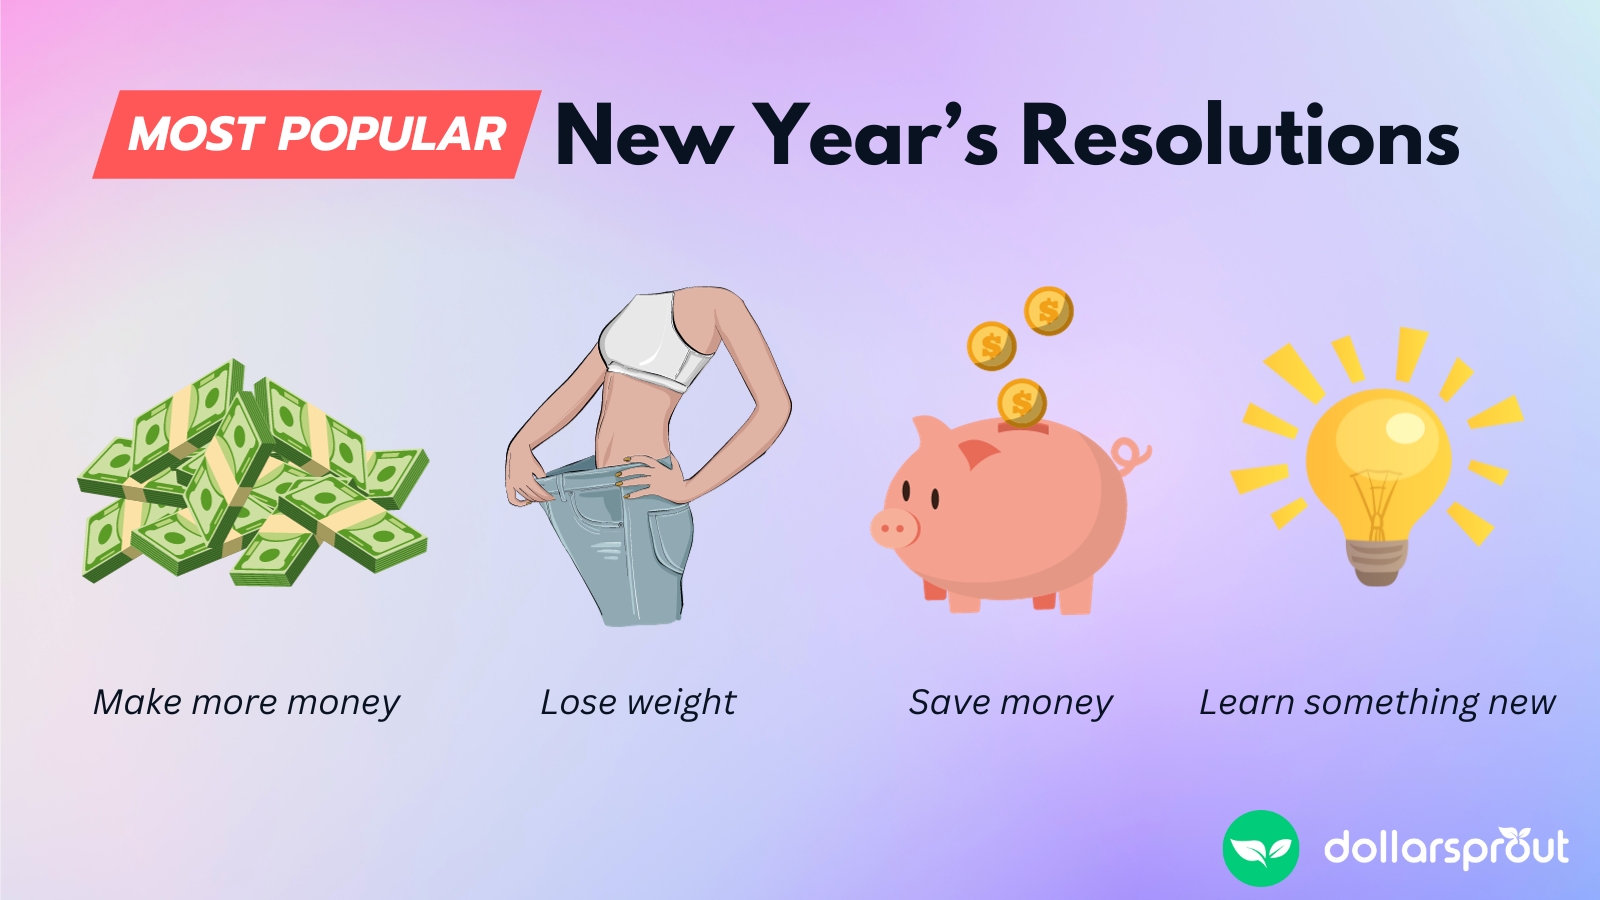 An infographic showing the most popular new year's resolutions: making more money, losing weight, saving money, and learning something new.